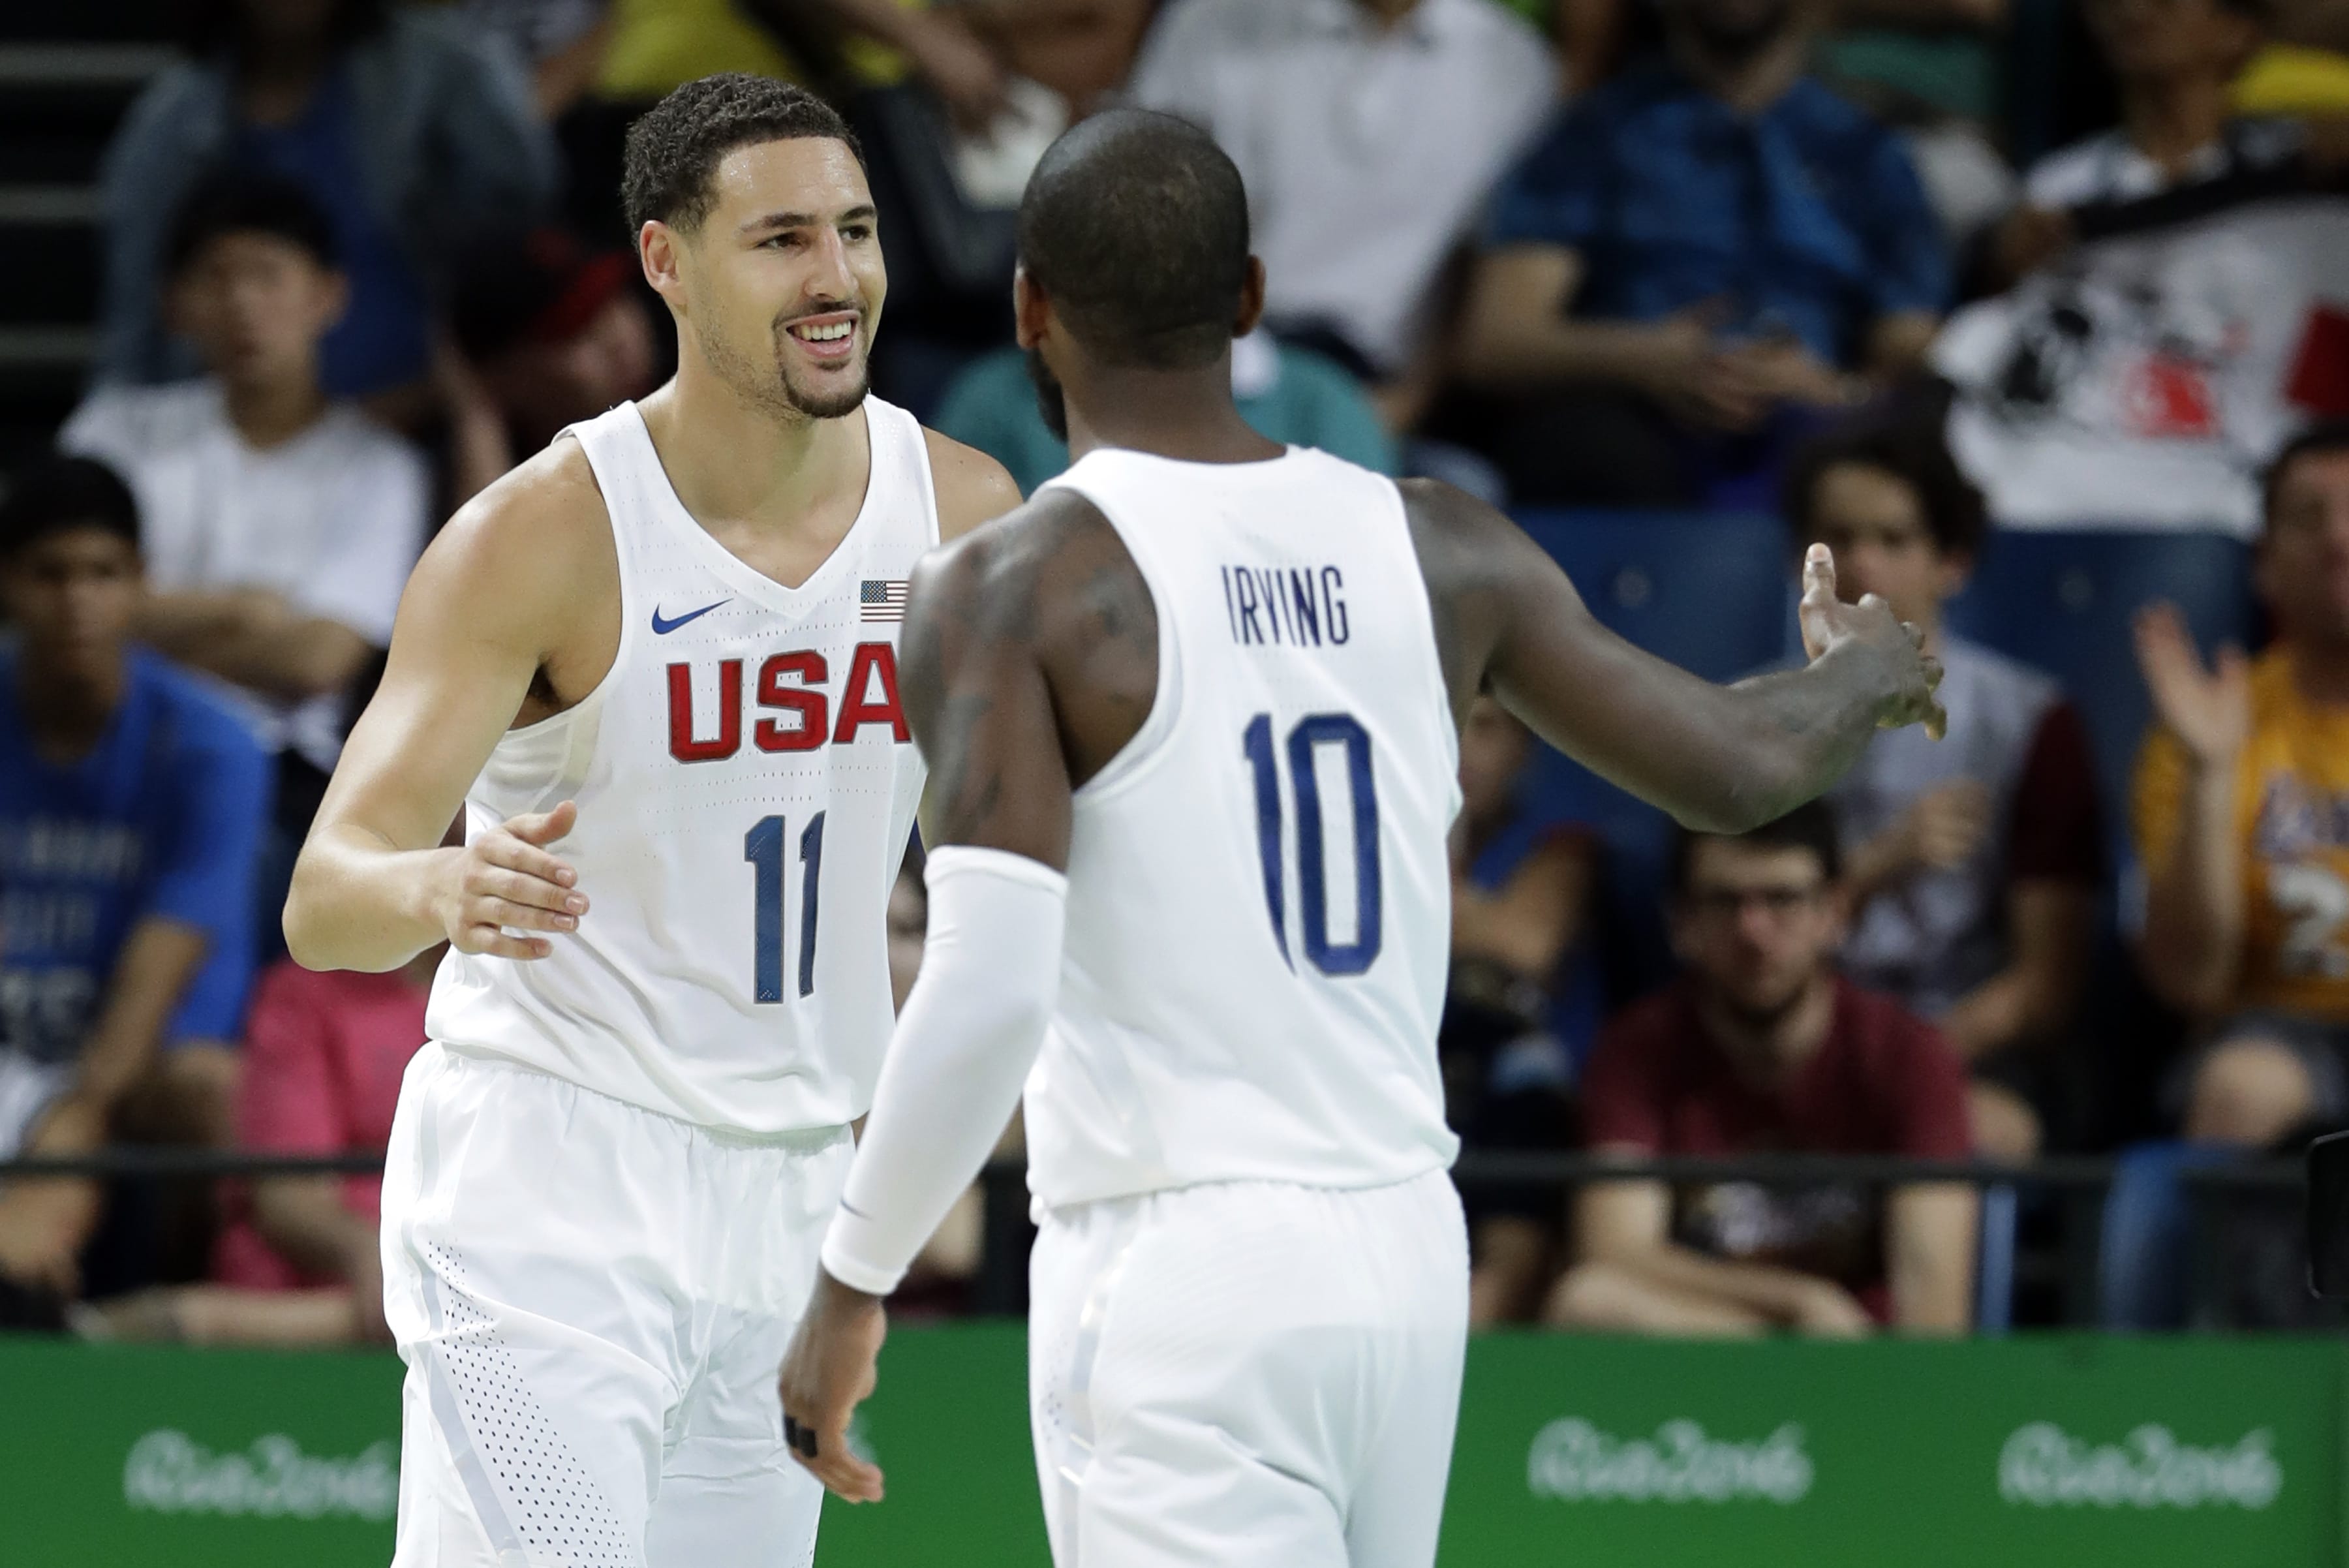 United States' Klay Thompson (11) celebrates with teammate Kyrie Irving (10) after making a basket during a basketball game against France at the 2016 Summer Olympics in Rio de Janeiro, Brazil, Sunday, Aug. 14, 2016.